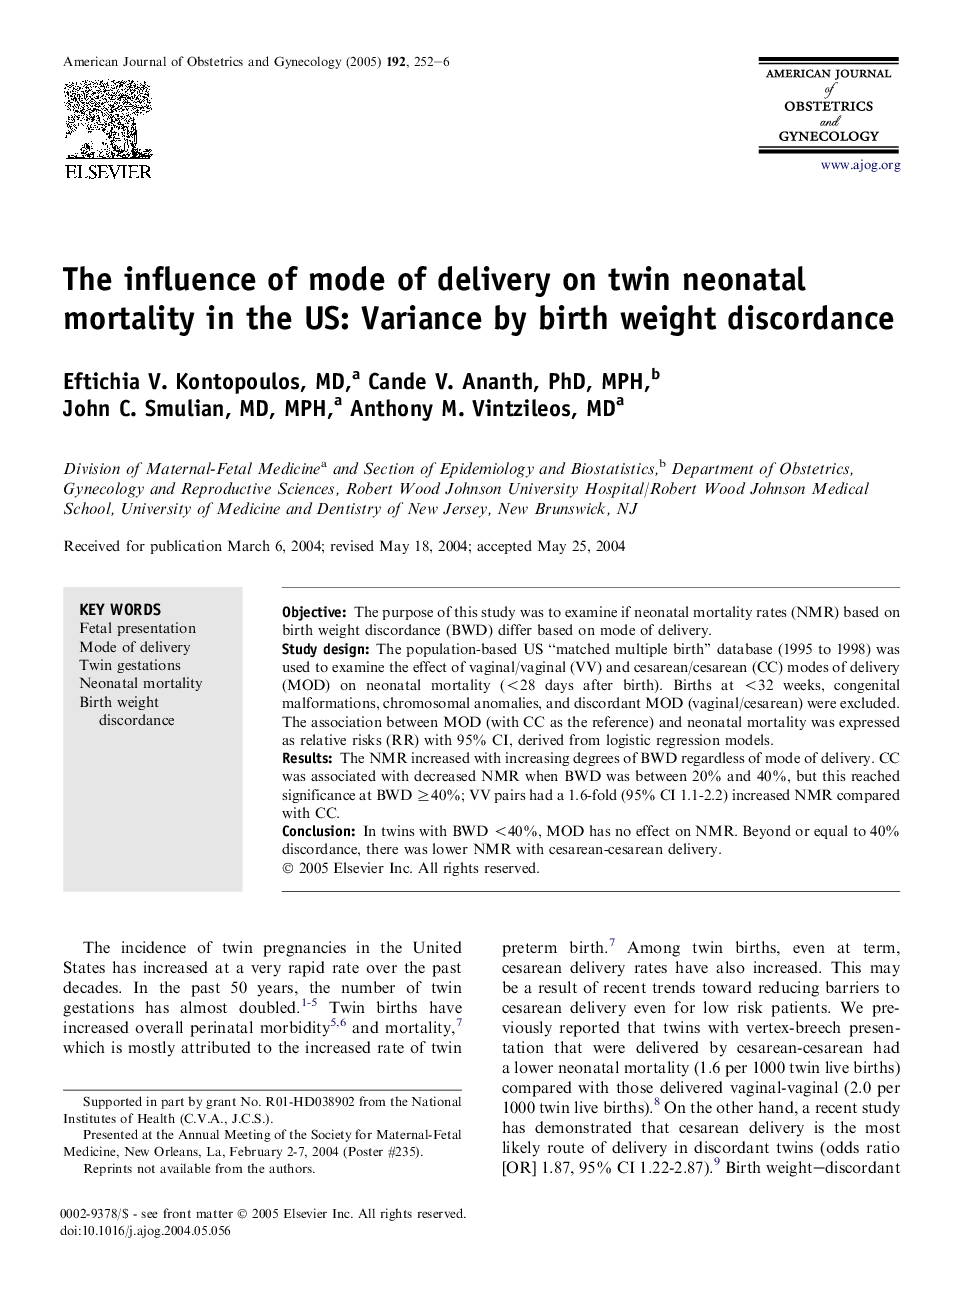 The influence of mode of delivery on twin neonatal mortality in the US: Variance by birth weight discordance